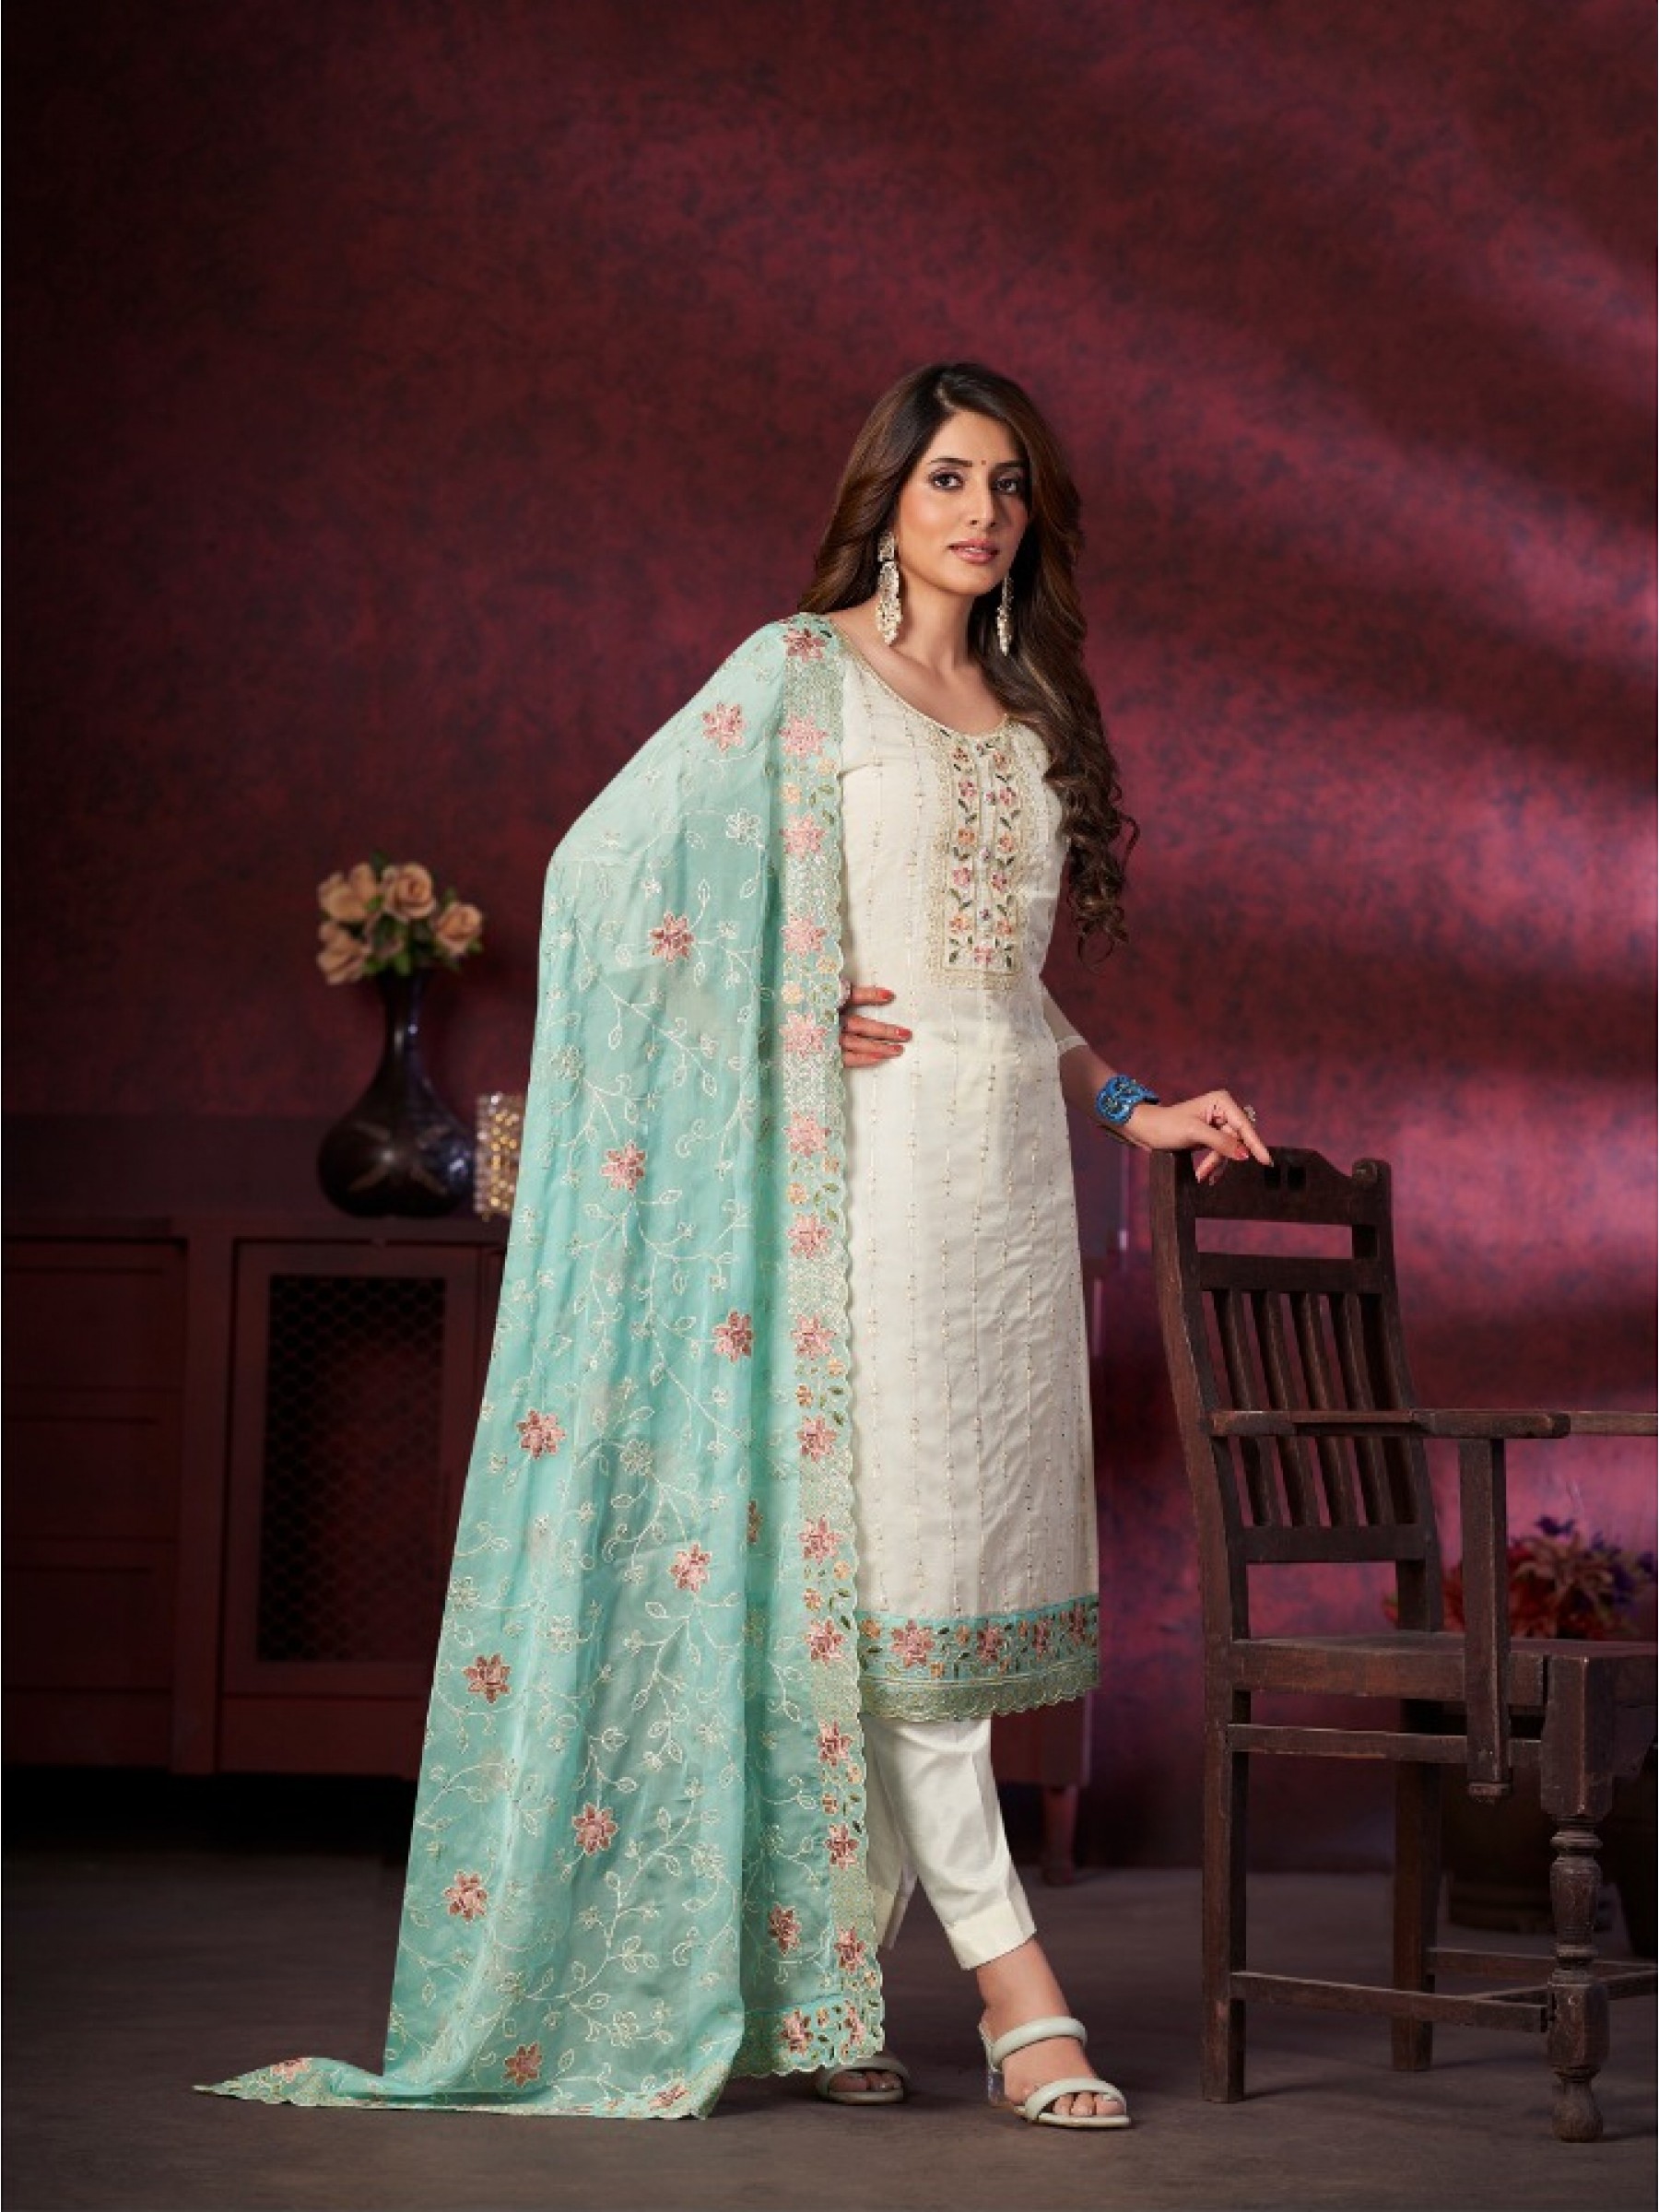 Organza Silk Party Wear  Suit  in White & Blue Color with  Embroidery Work